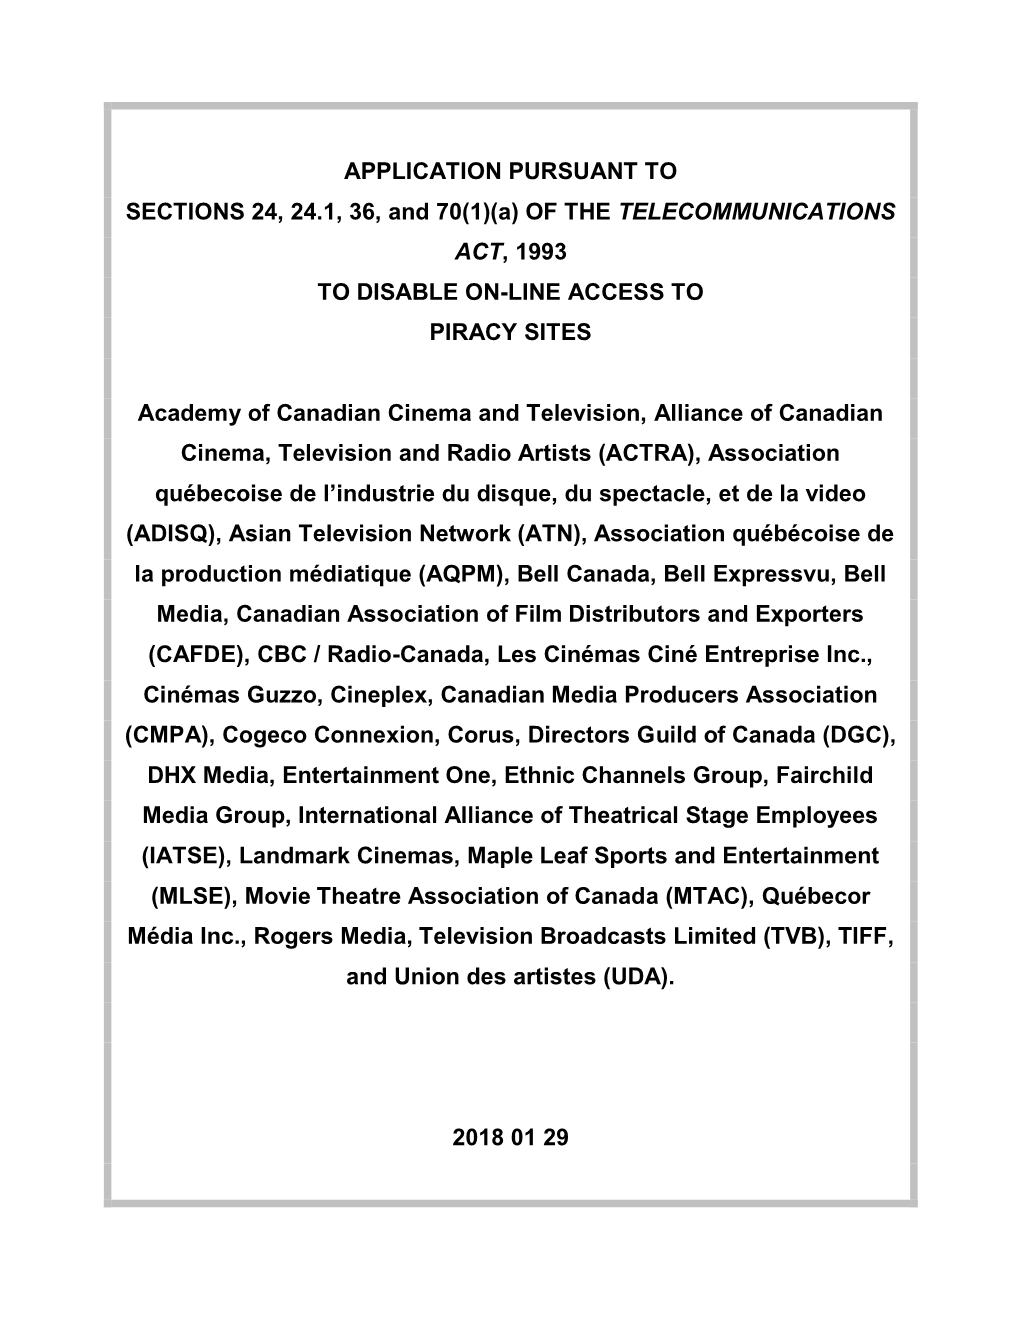 APPLICATION PURSUANT to SECTIONS 24, 24.1, 36, and 70(1)(A) of the TELECOMMUNICATIONS ACT, 1993 to DISABLE ON-LINE ACCESS to PIRACY SITES